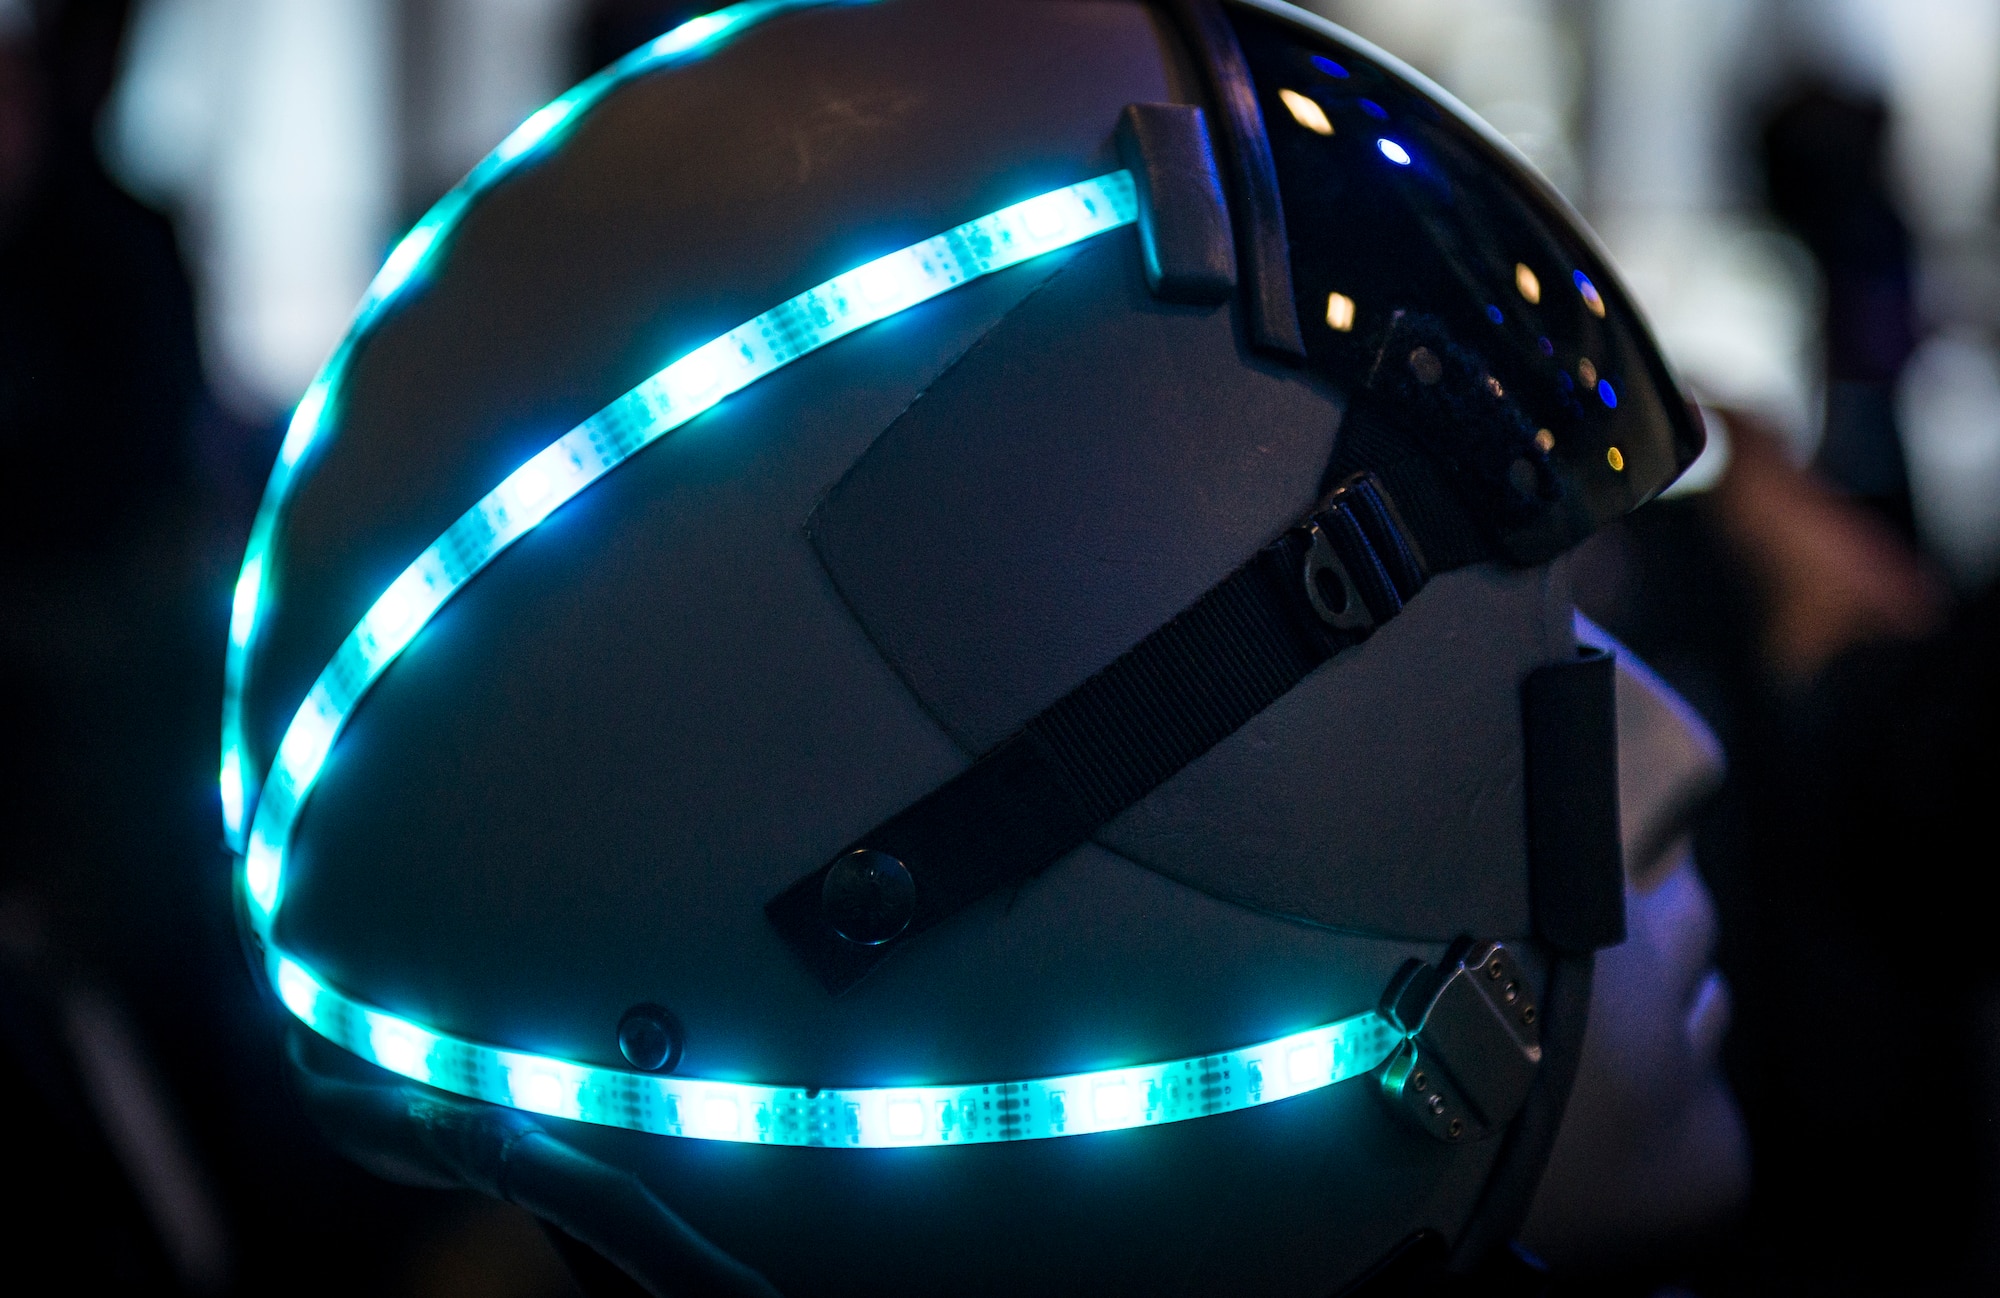 A helmet sits turned on at a booth during AFWERX Helmet Challenge at the Enclave Las Vegas, Nev., November 14, 2018. The purpose of AFWERX Las Vegas is to solve problems for the Air Force by getting entrepreneurs and innovators to come together to brain storm ideas. (U.S. Air Force photo by Airman 1st Class Bryan T. Guthrie)